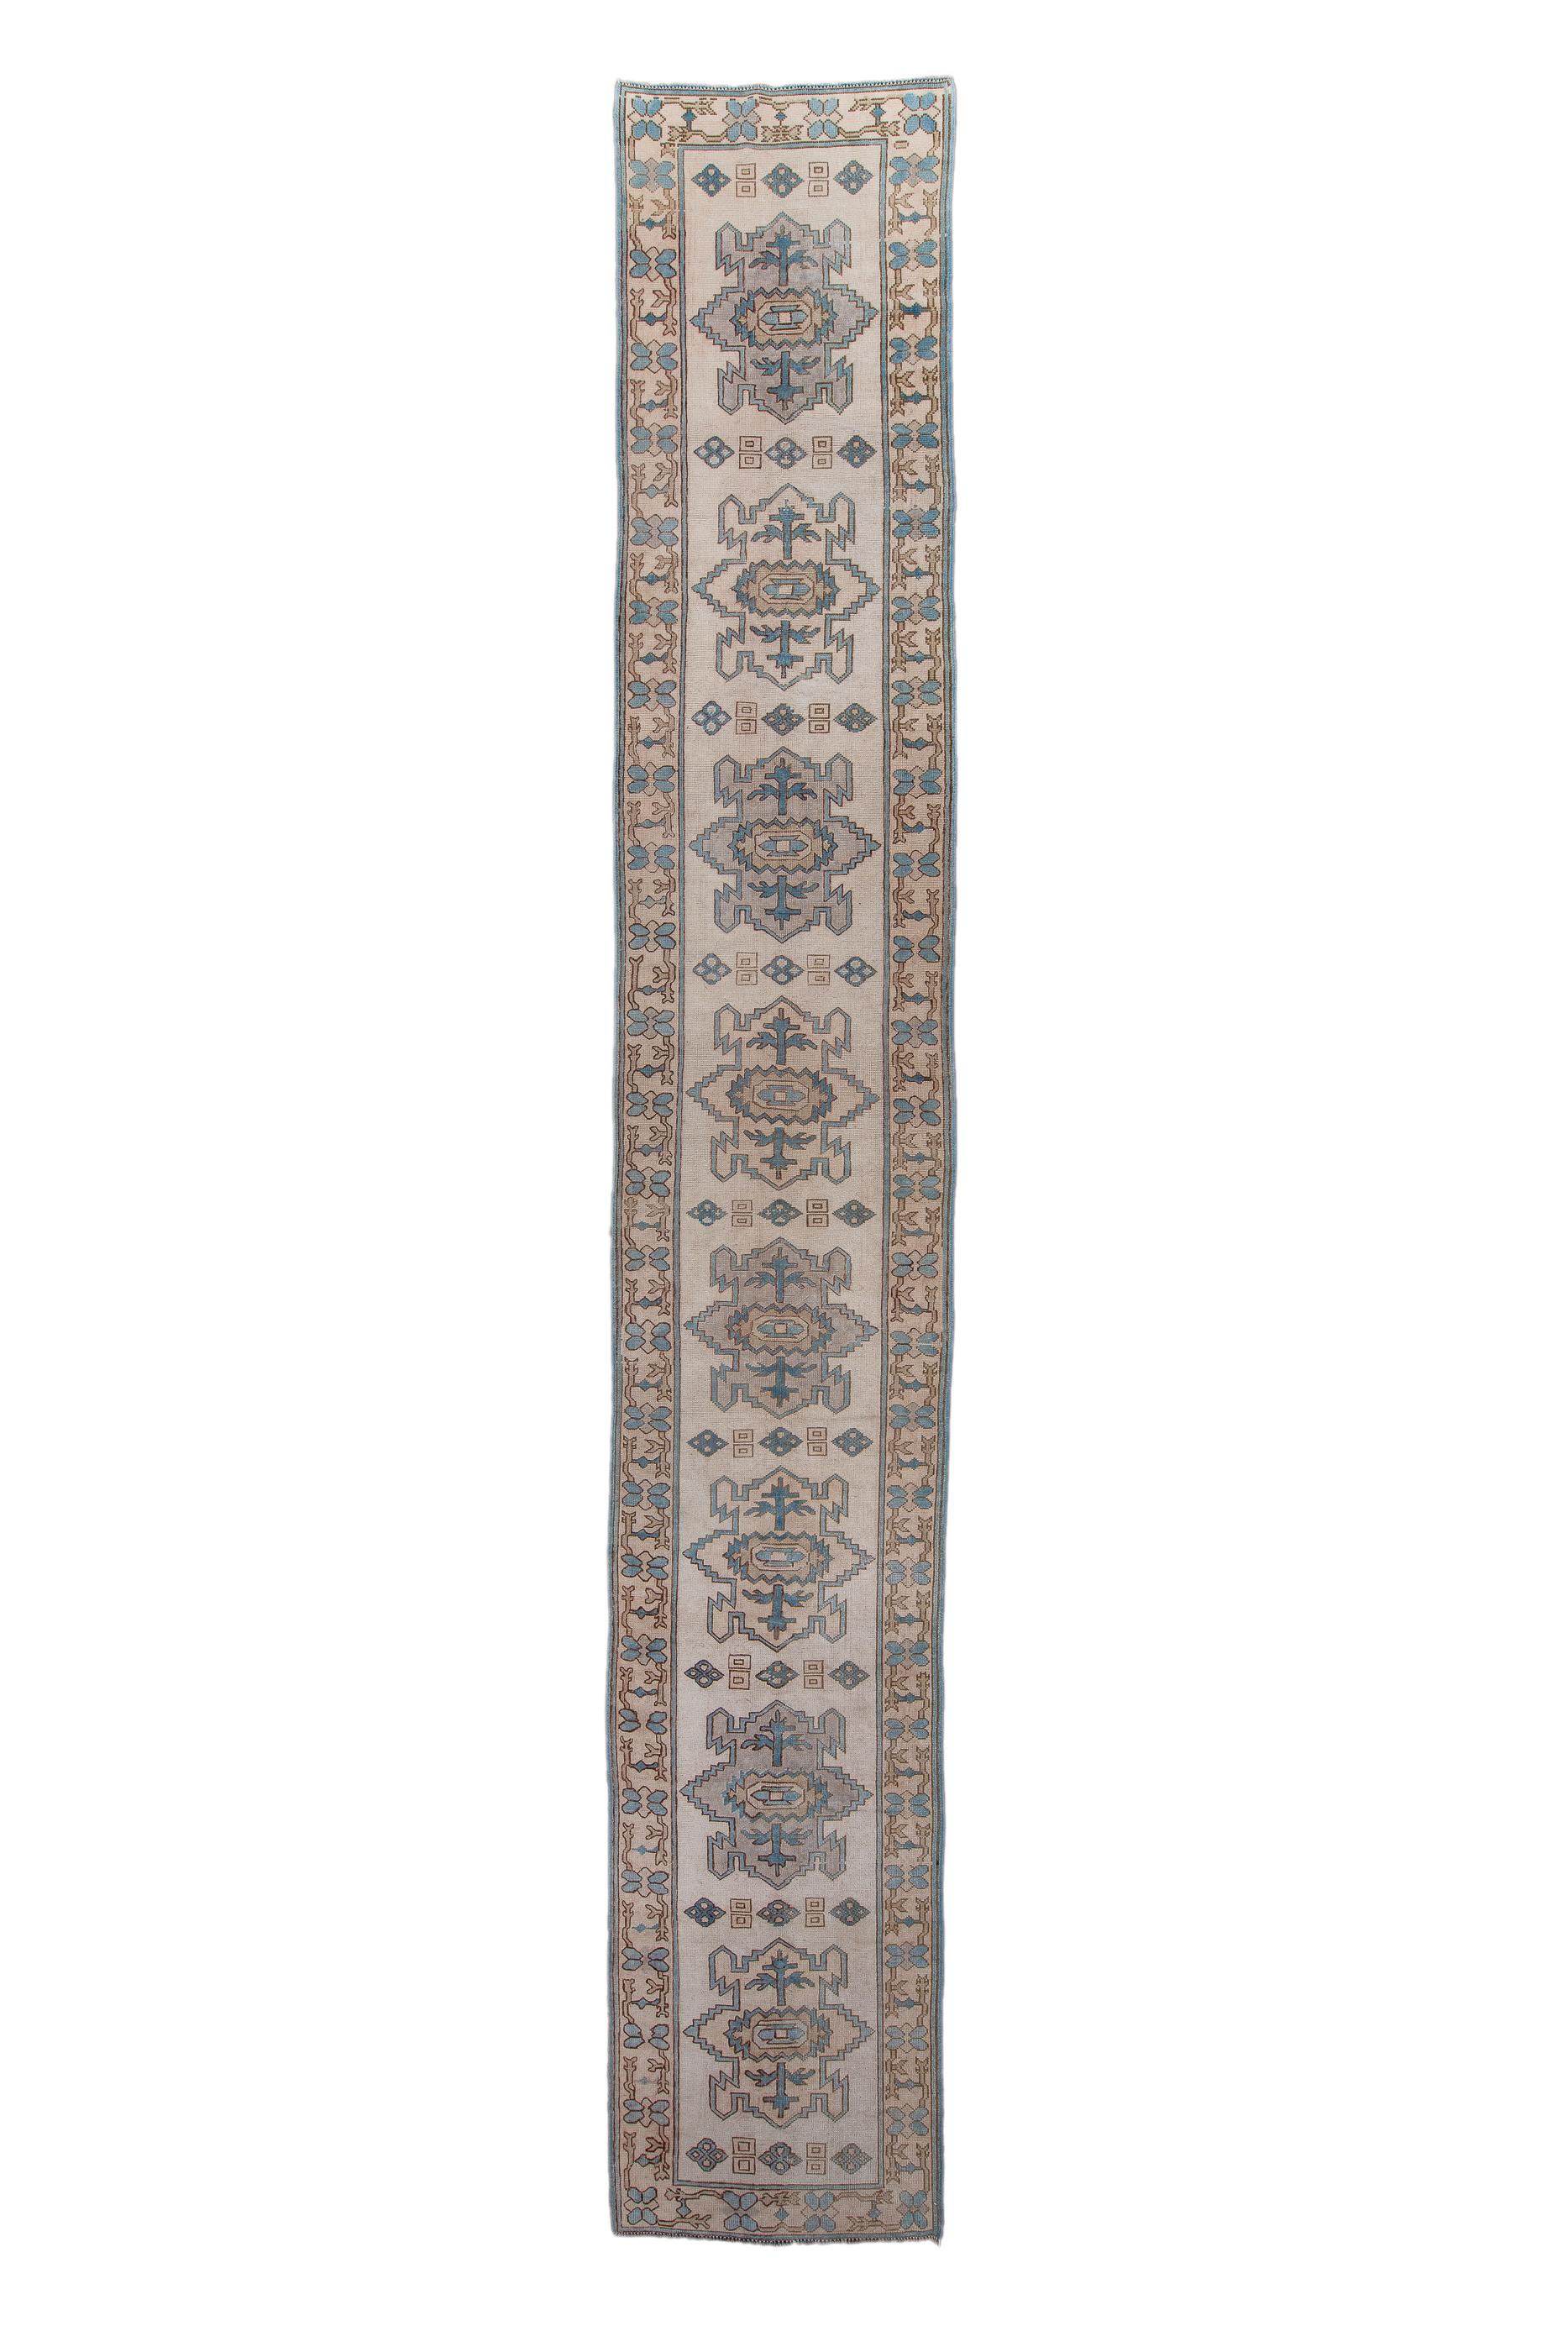 The ivory field displays eight reptilian medallions, all with flower and stem centres, and uniformly divided by short strings of squares and lozenges. Simple flower, straw ground narrow border. Coarse weave, good condition.

Rug Size
2'10x18'1